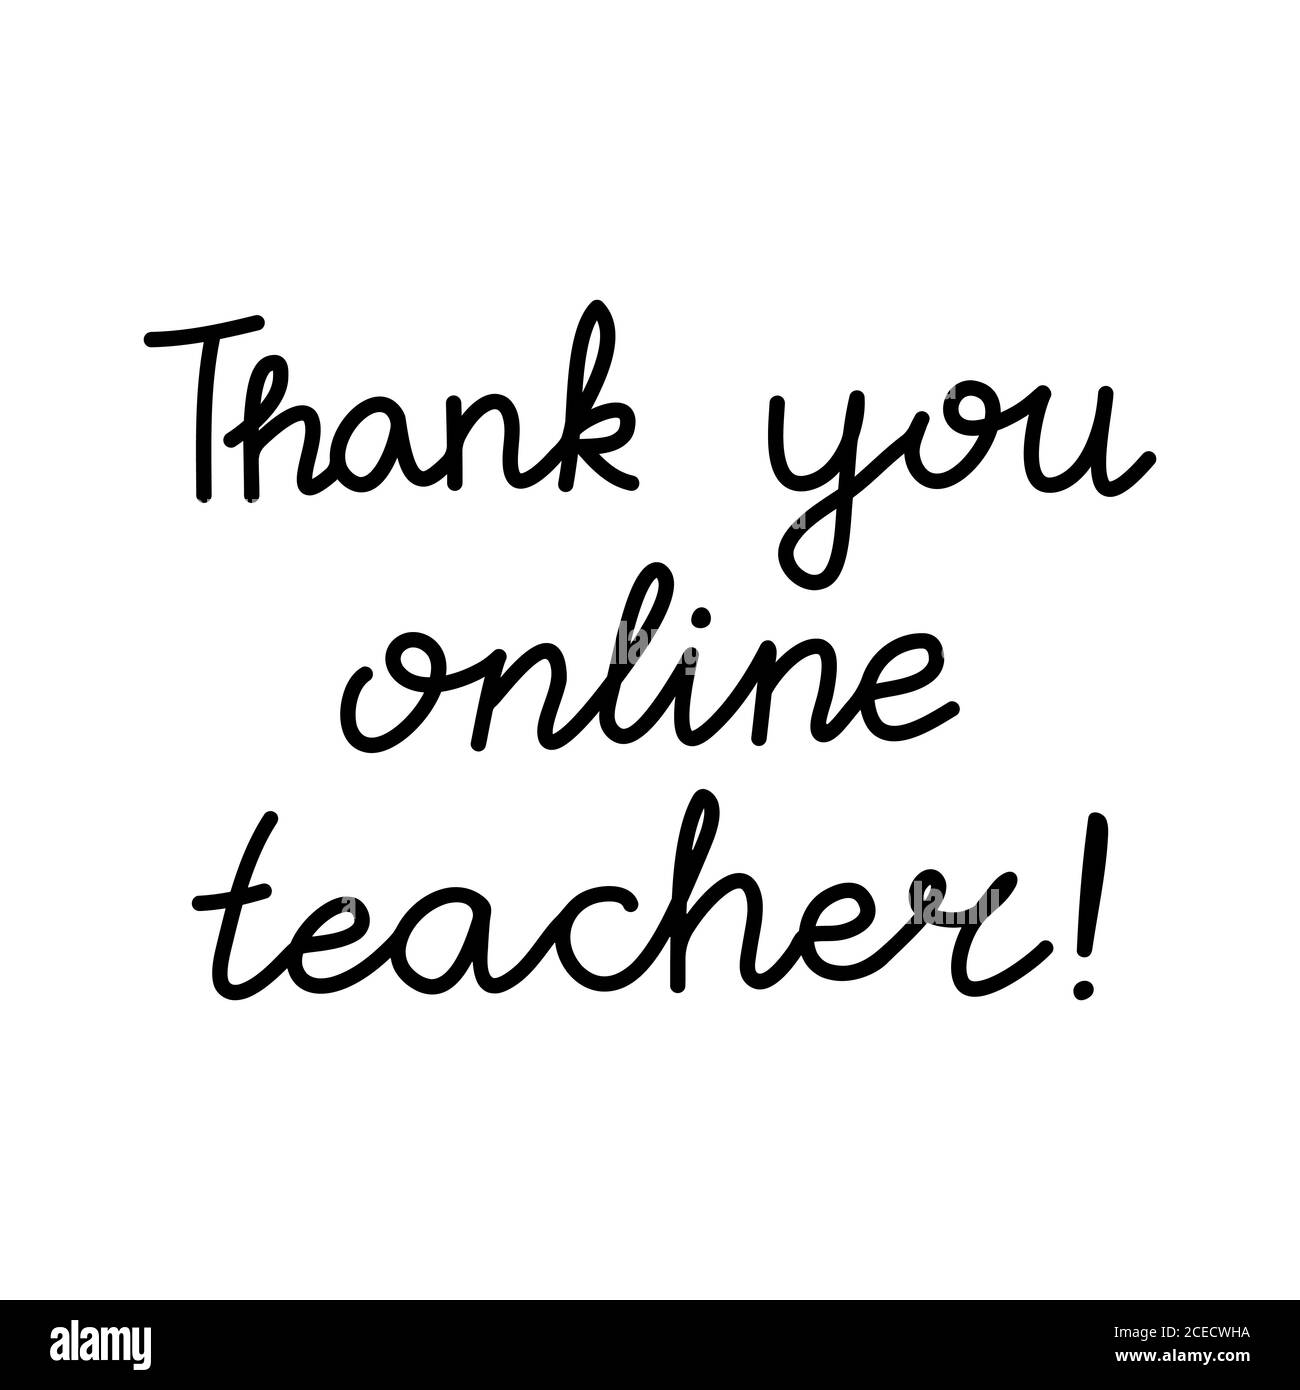 Thank You Card Teacher Cut Out Stock Images & Pictures - Alamy